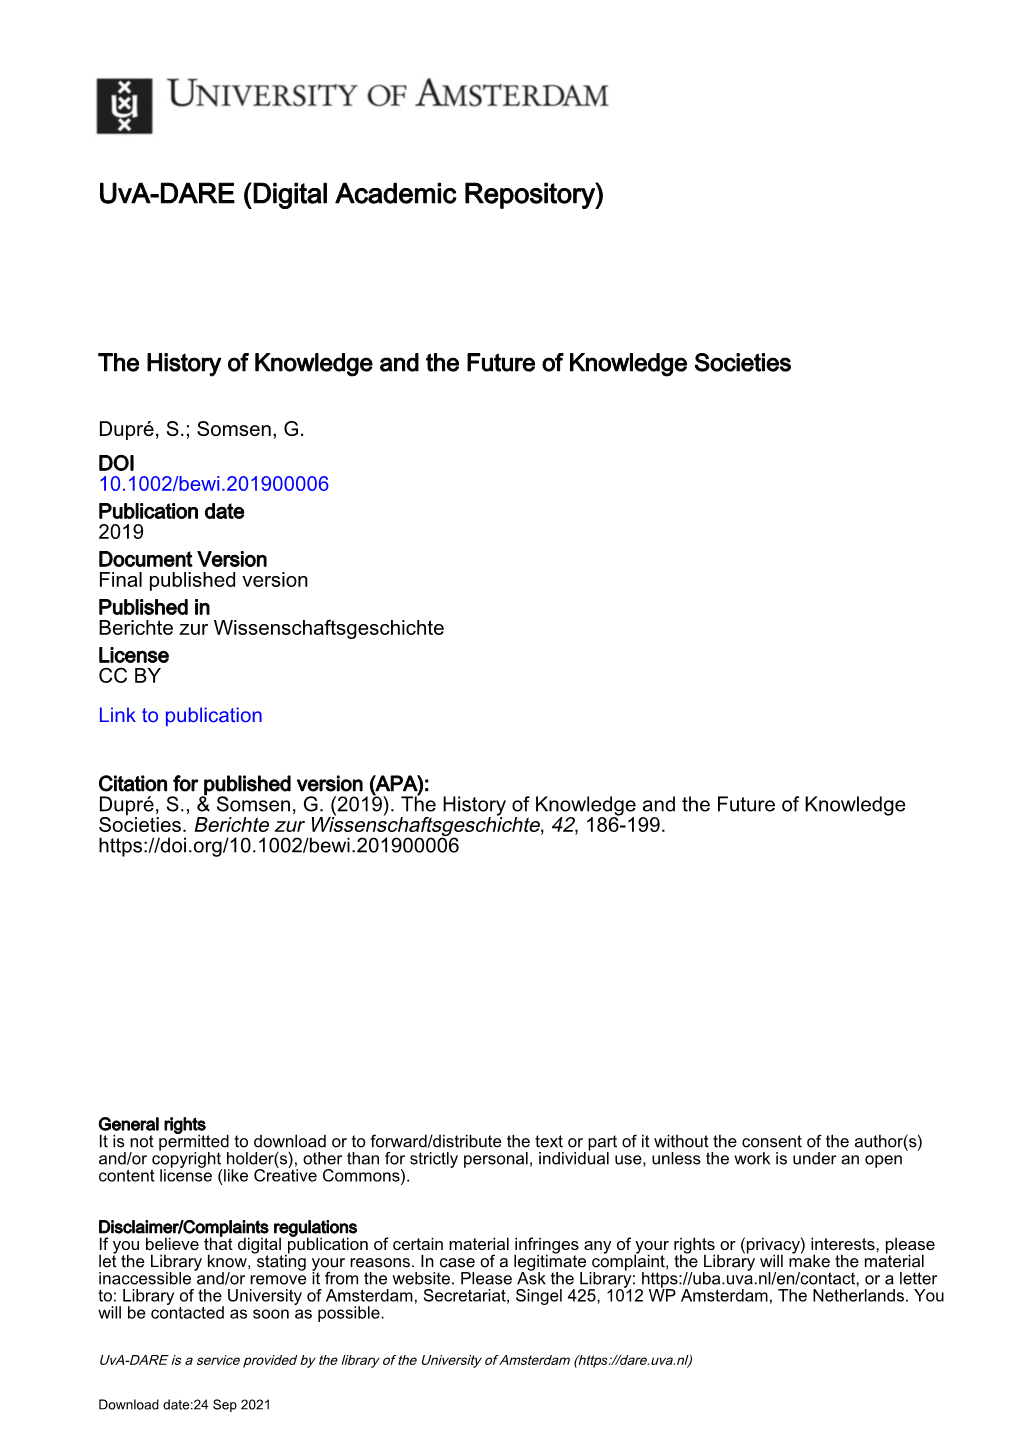 The History of Knowledge and the Future of Knowledge Societies